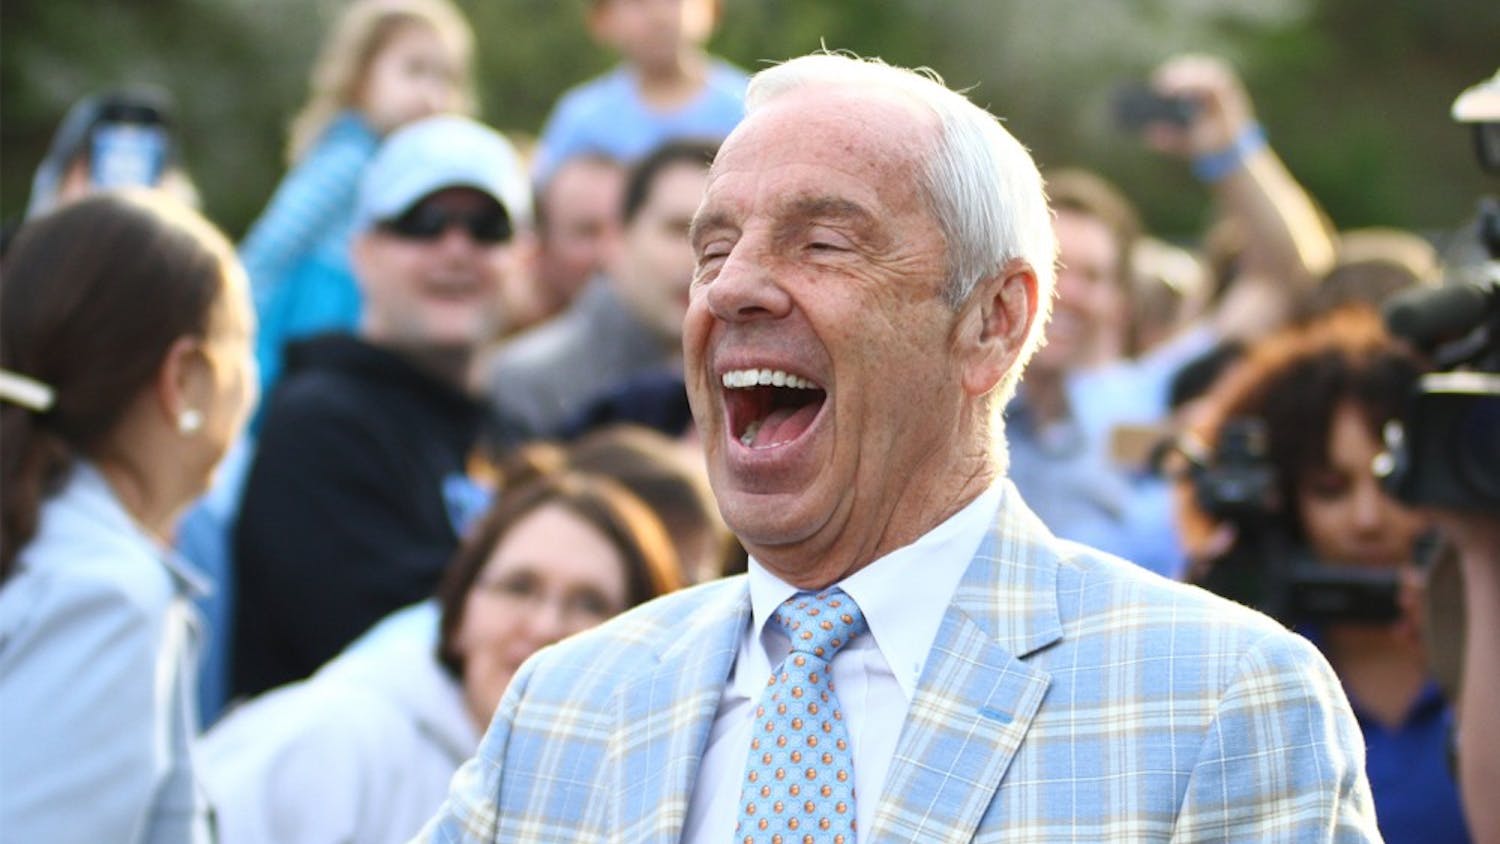 Coach Roy Williams heads to Houston with the team for the Final Four game against Syracuse.